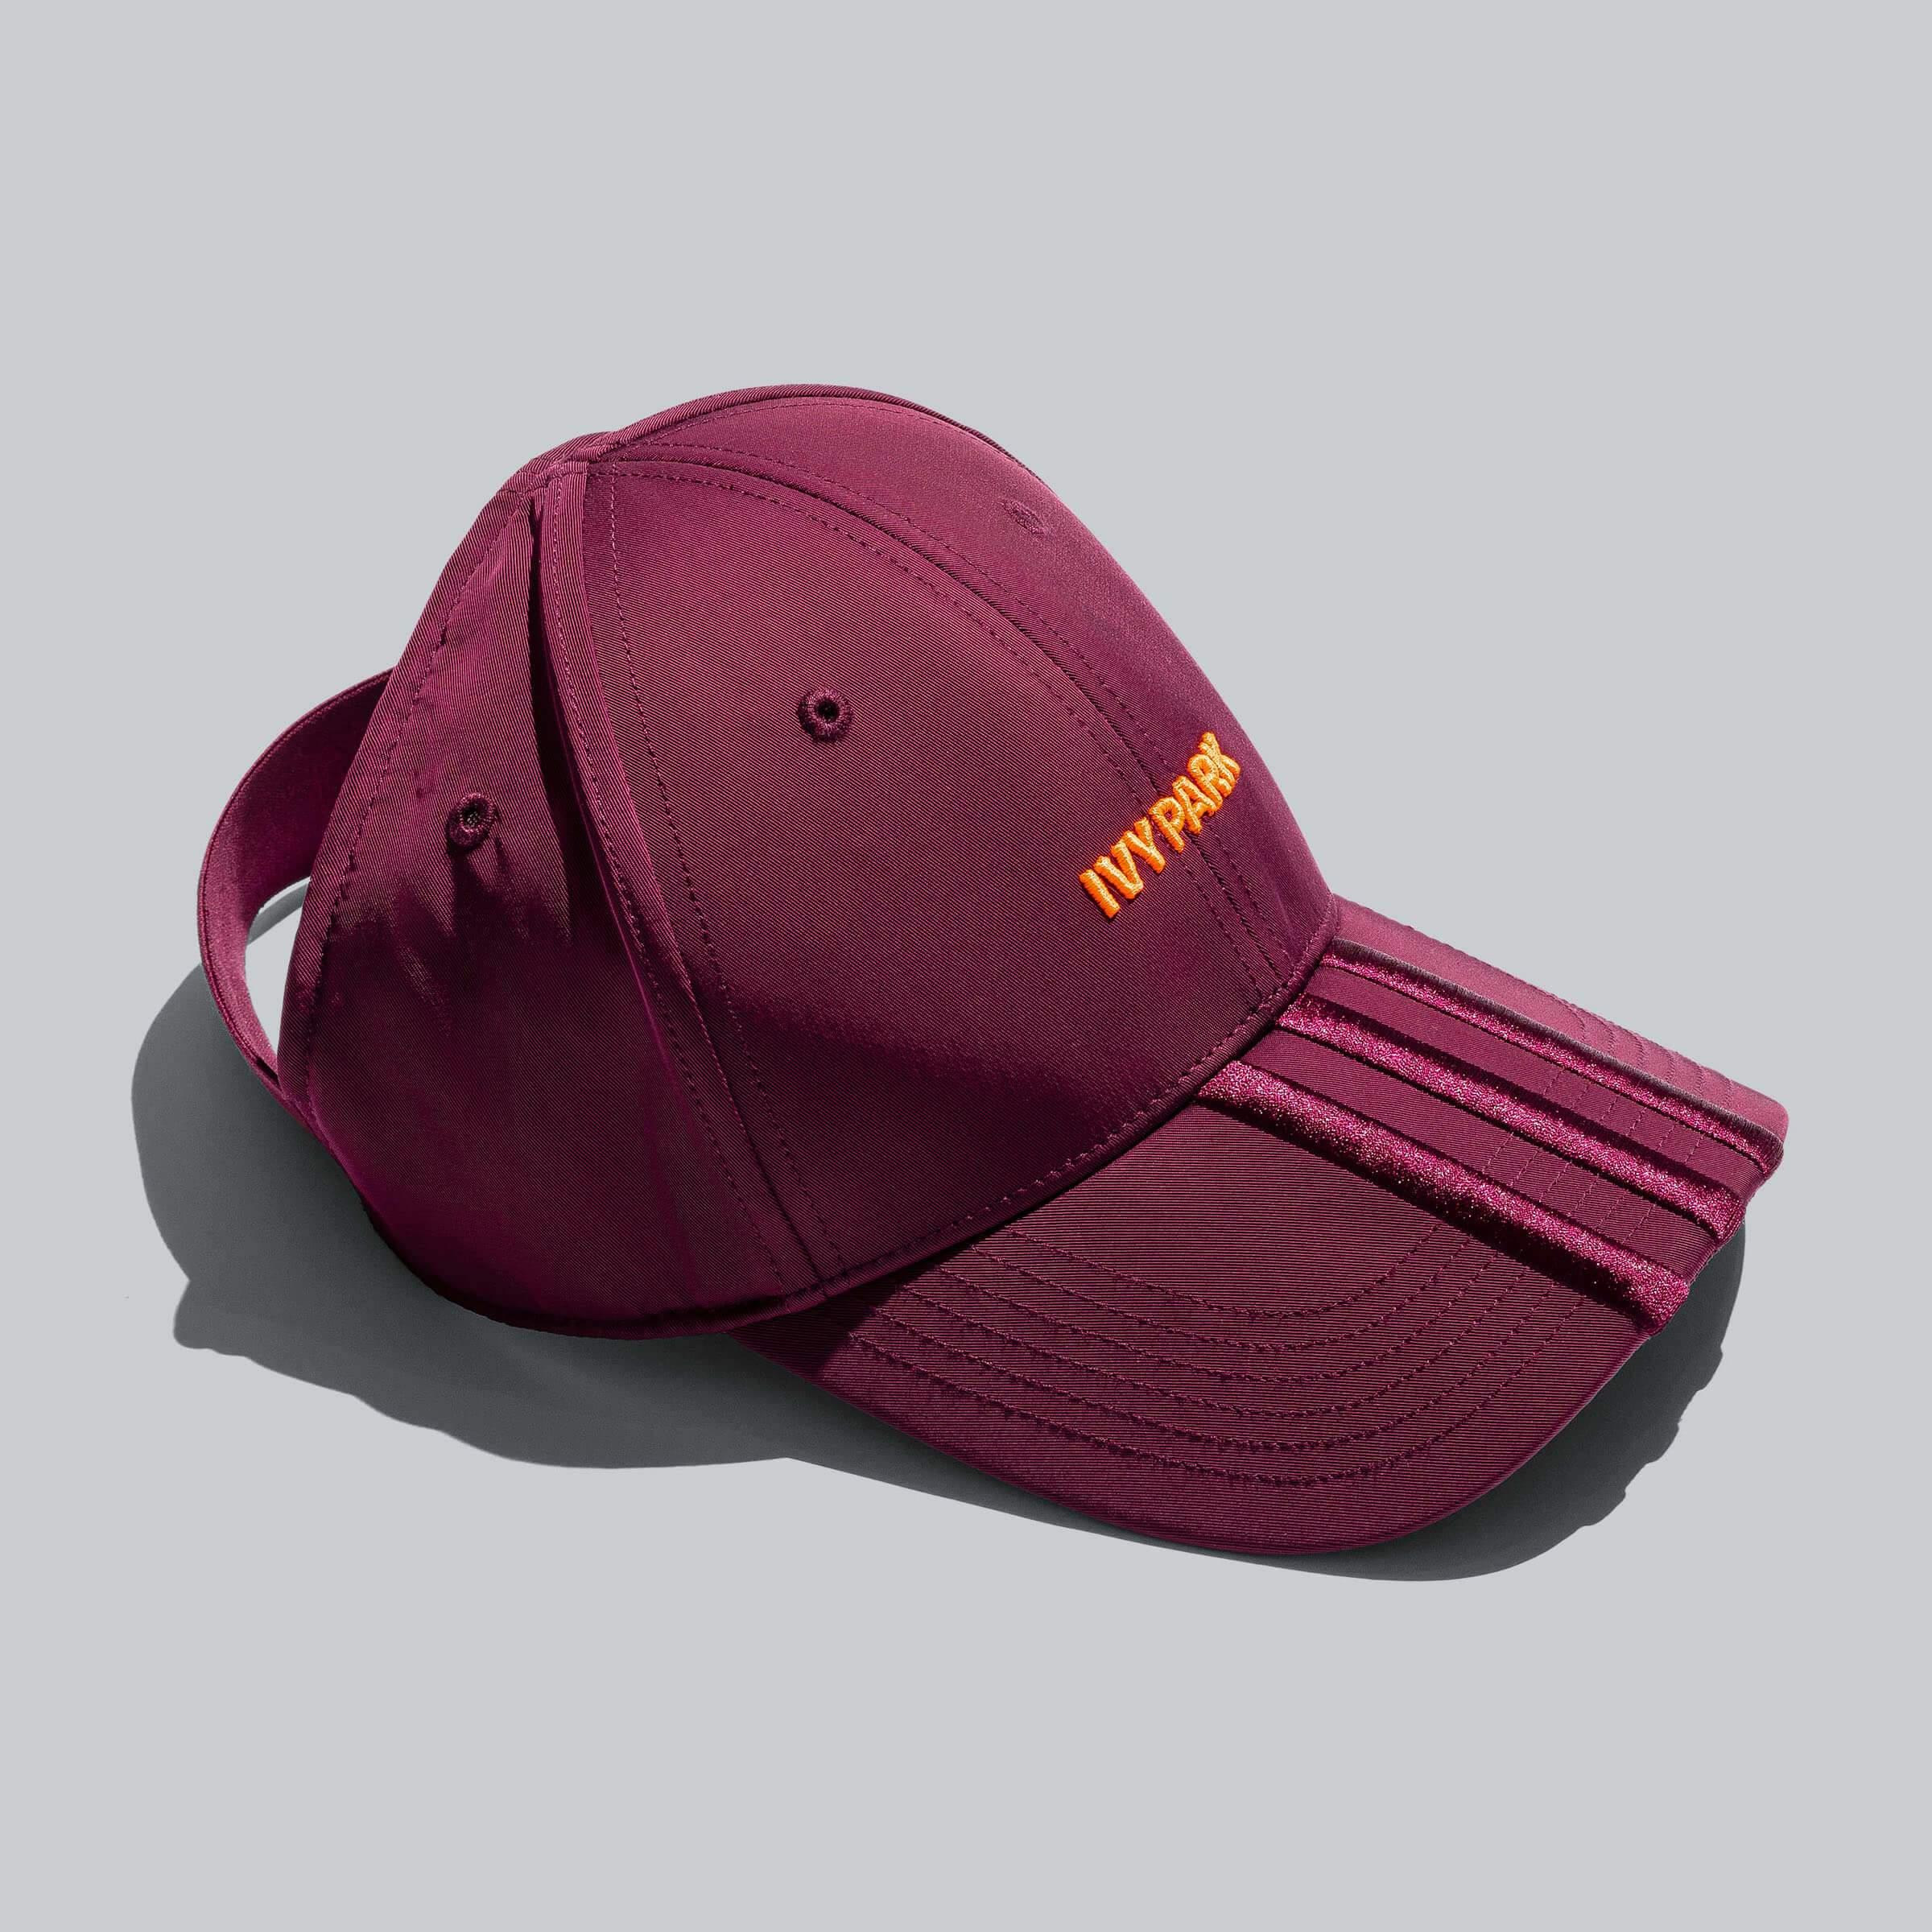 adidas Synthetic Ivy Park X Backless Cap in Maroon (Purple) - Lyst